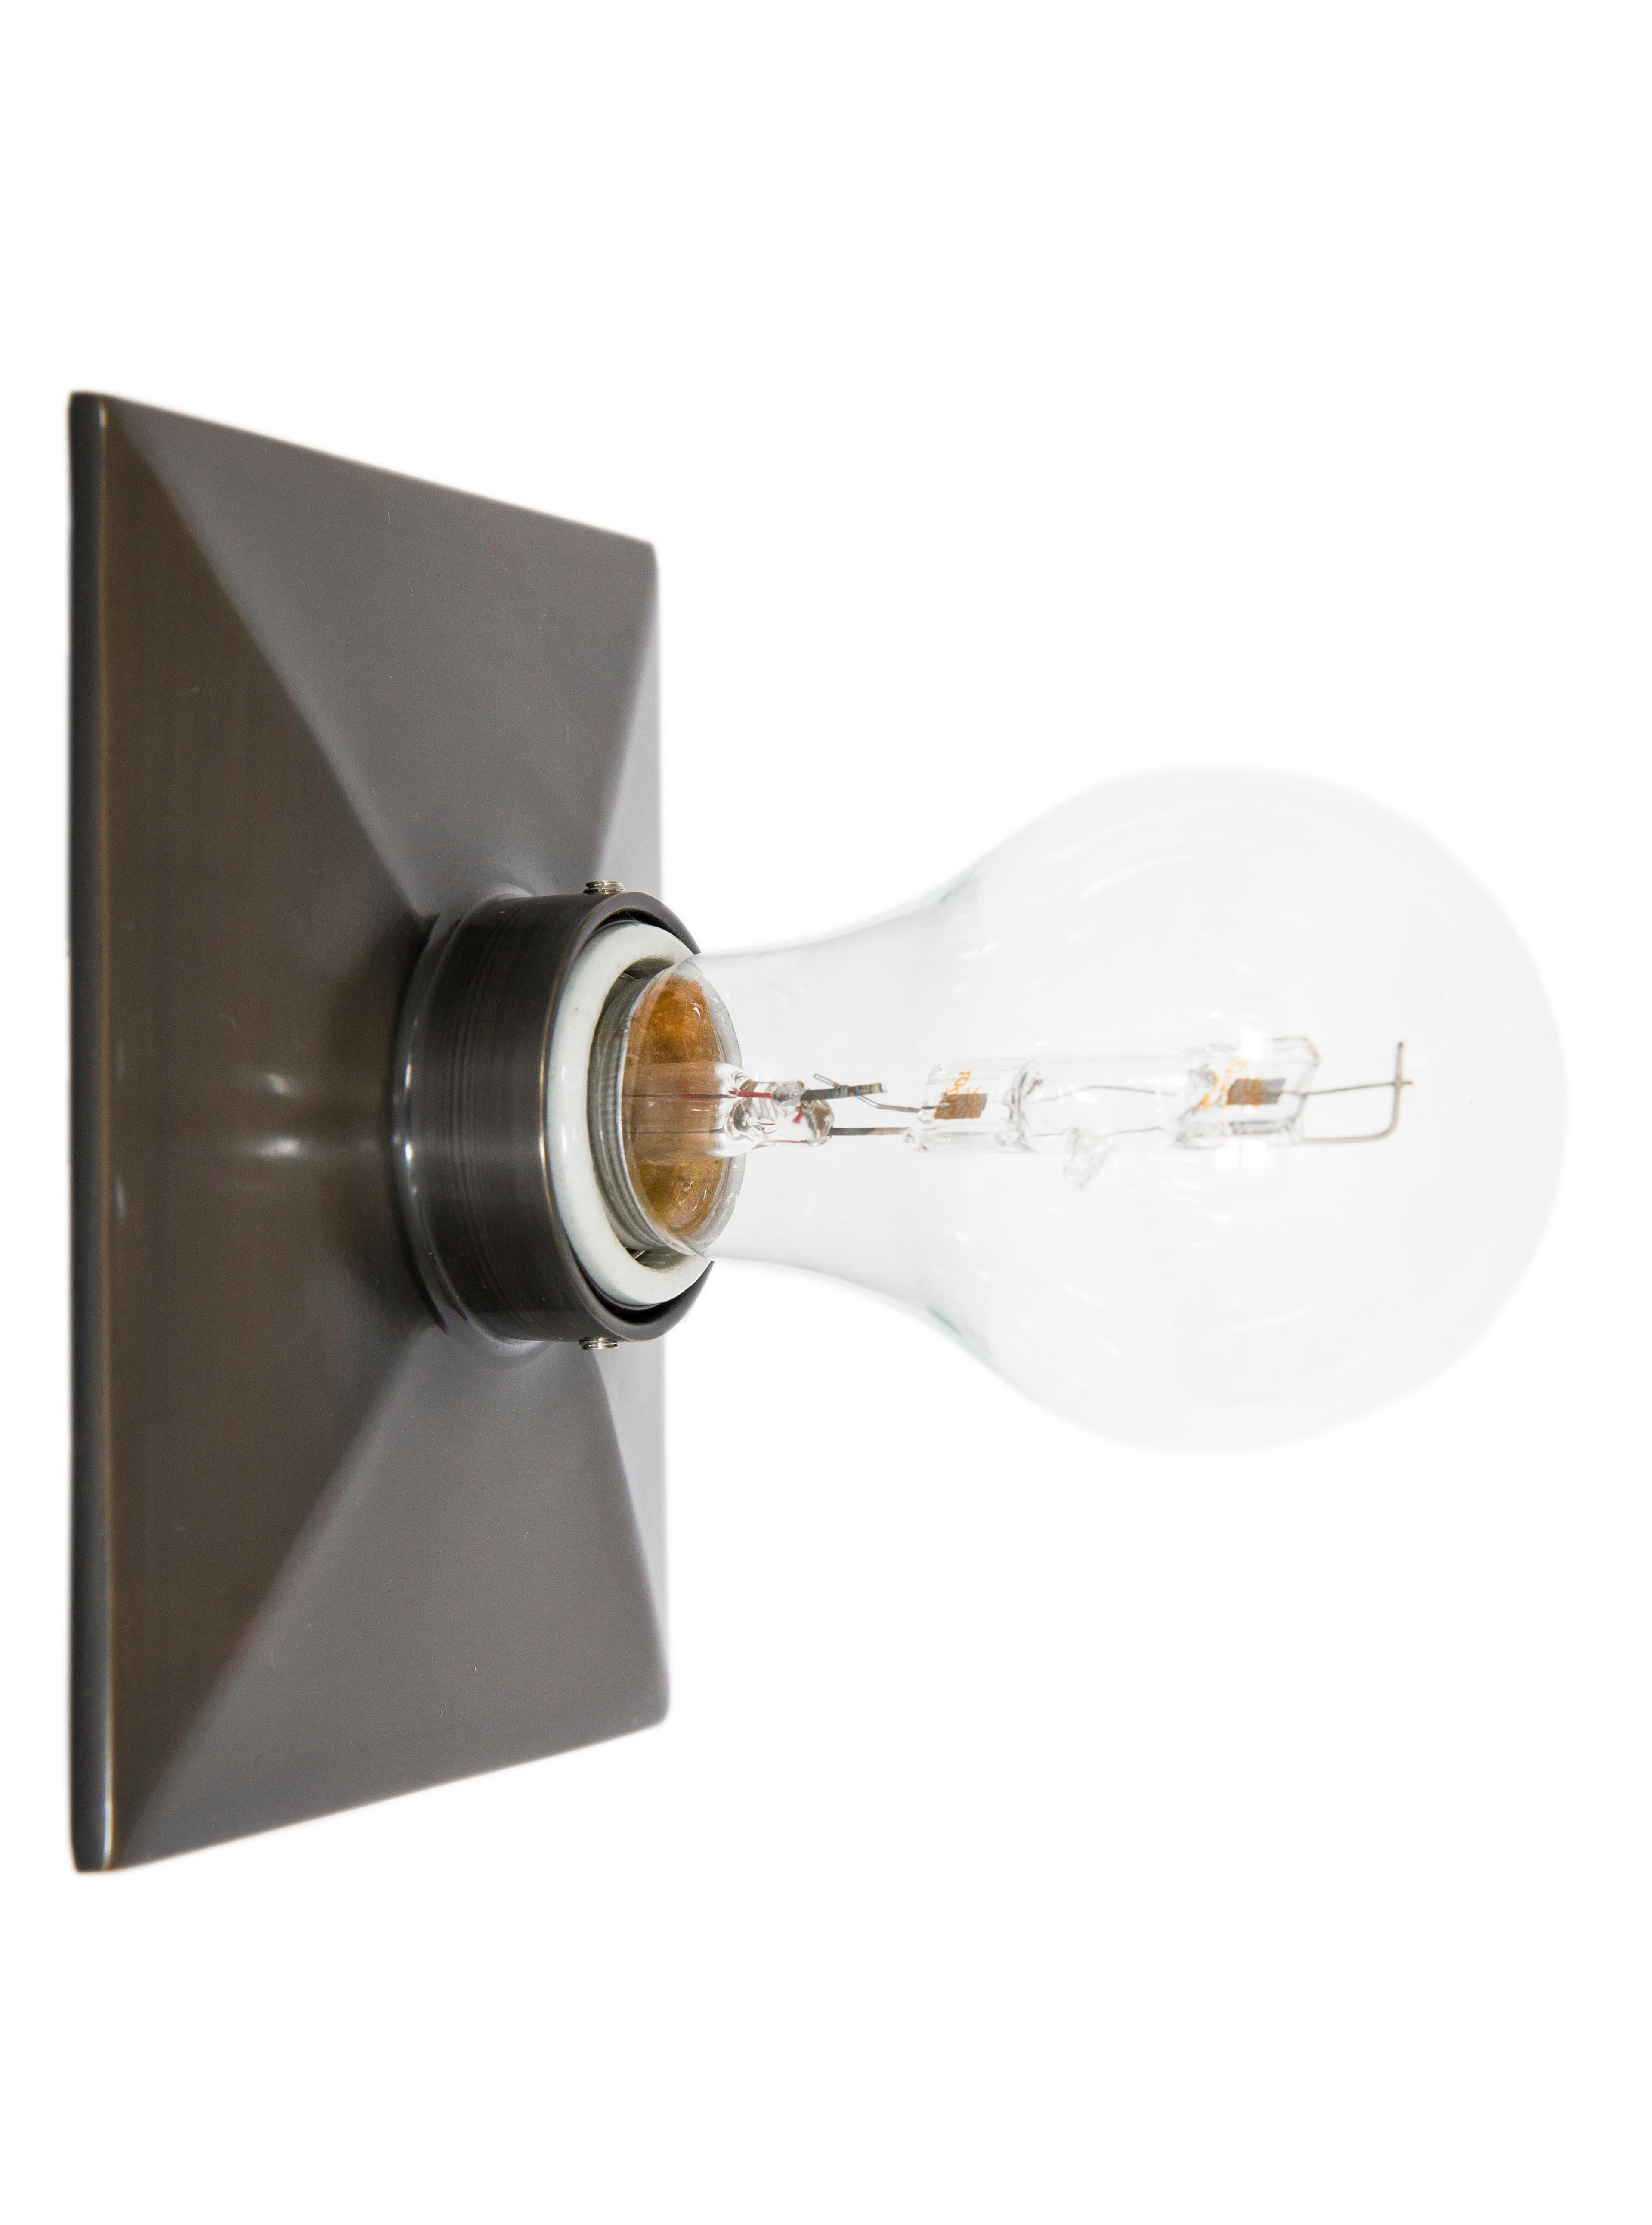 The Vica light is a rectangular cast metal escutcheon plate with a beveled edge design and porcelain socket. The fixture can be wall or ceiling mounted.

The maximum wattage bulb recommended is 60W. The vica light is UL listed.

Handcrafted in